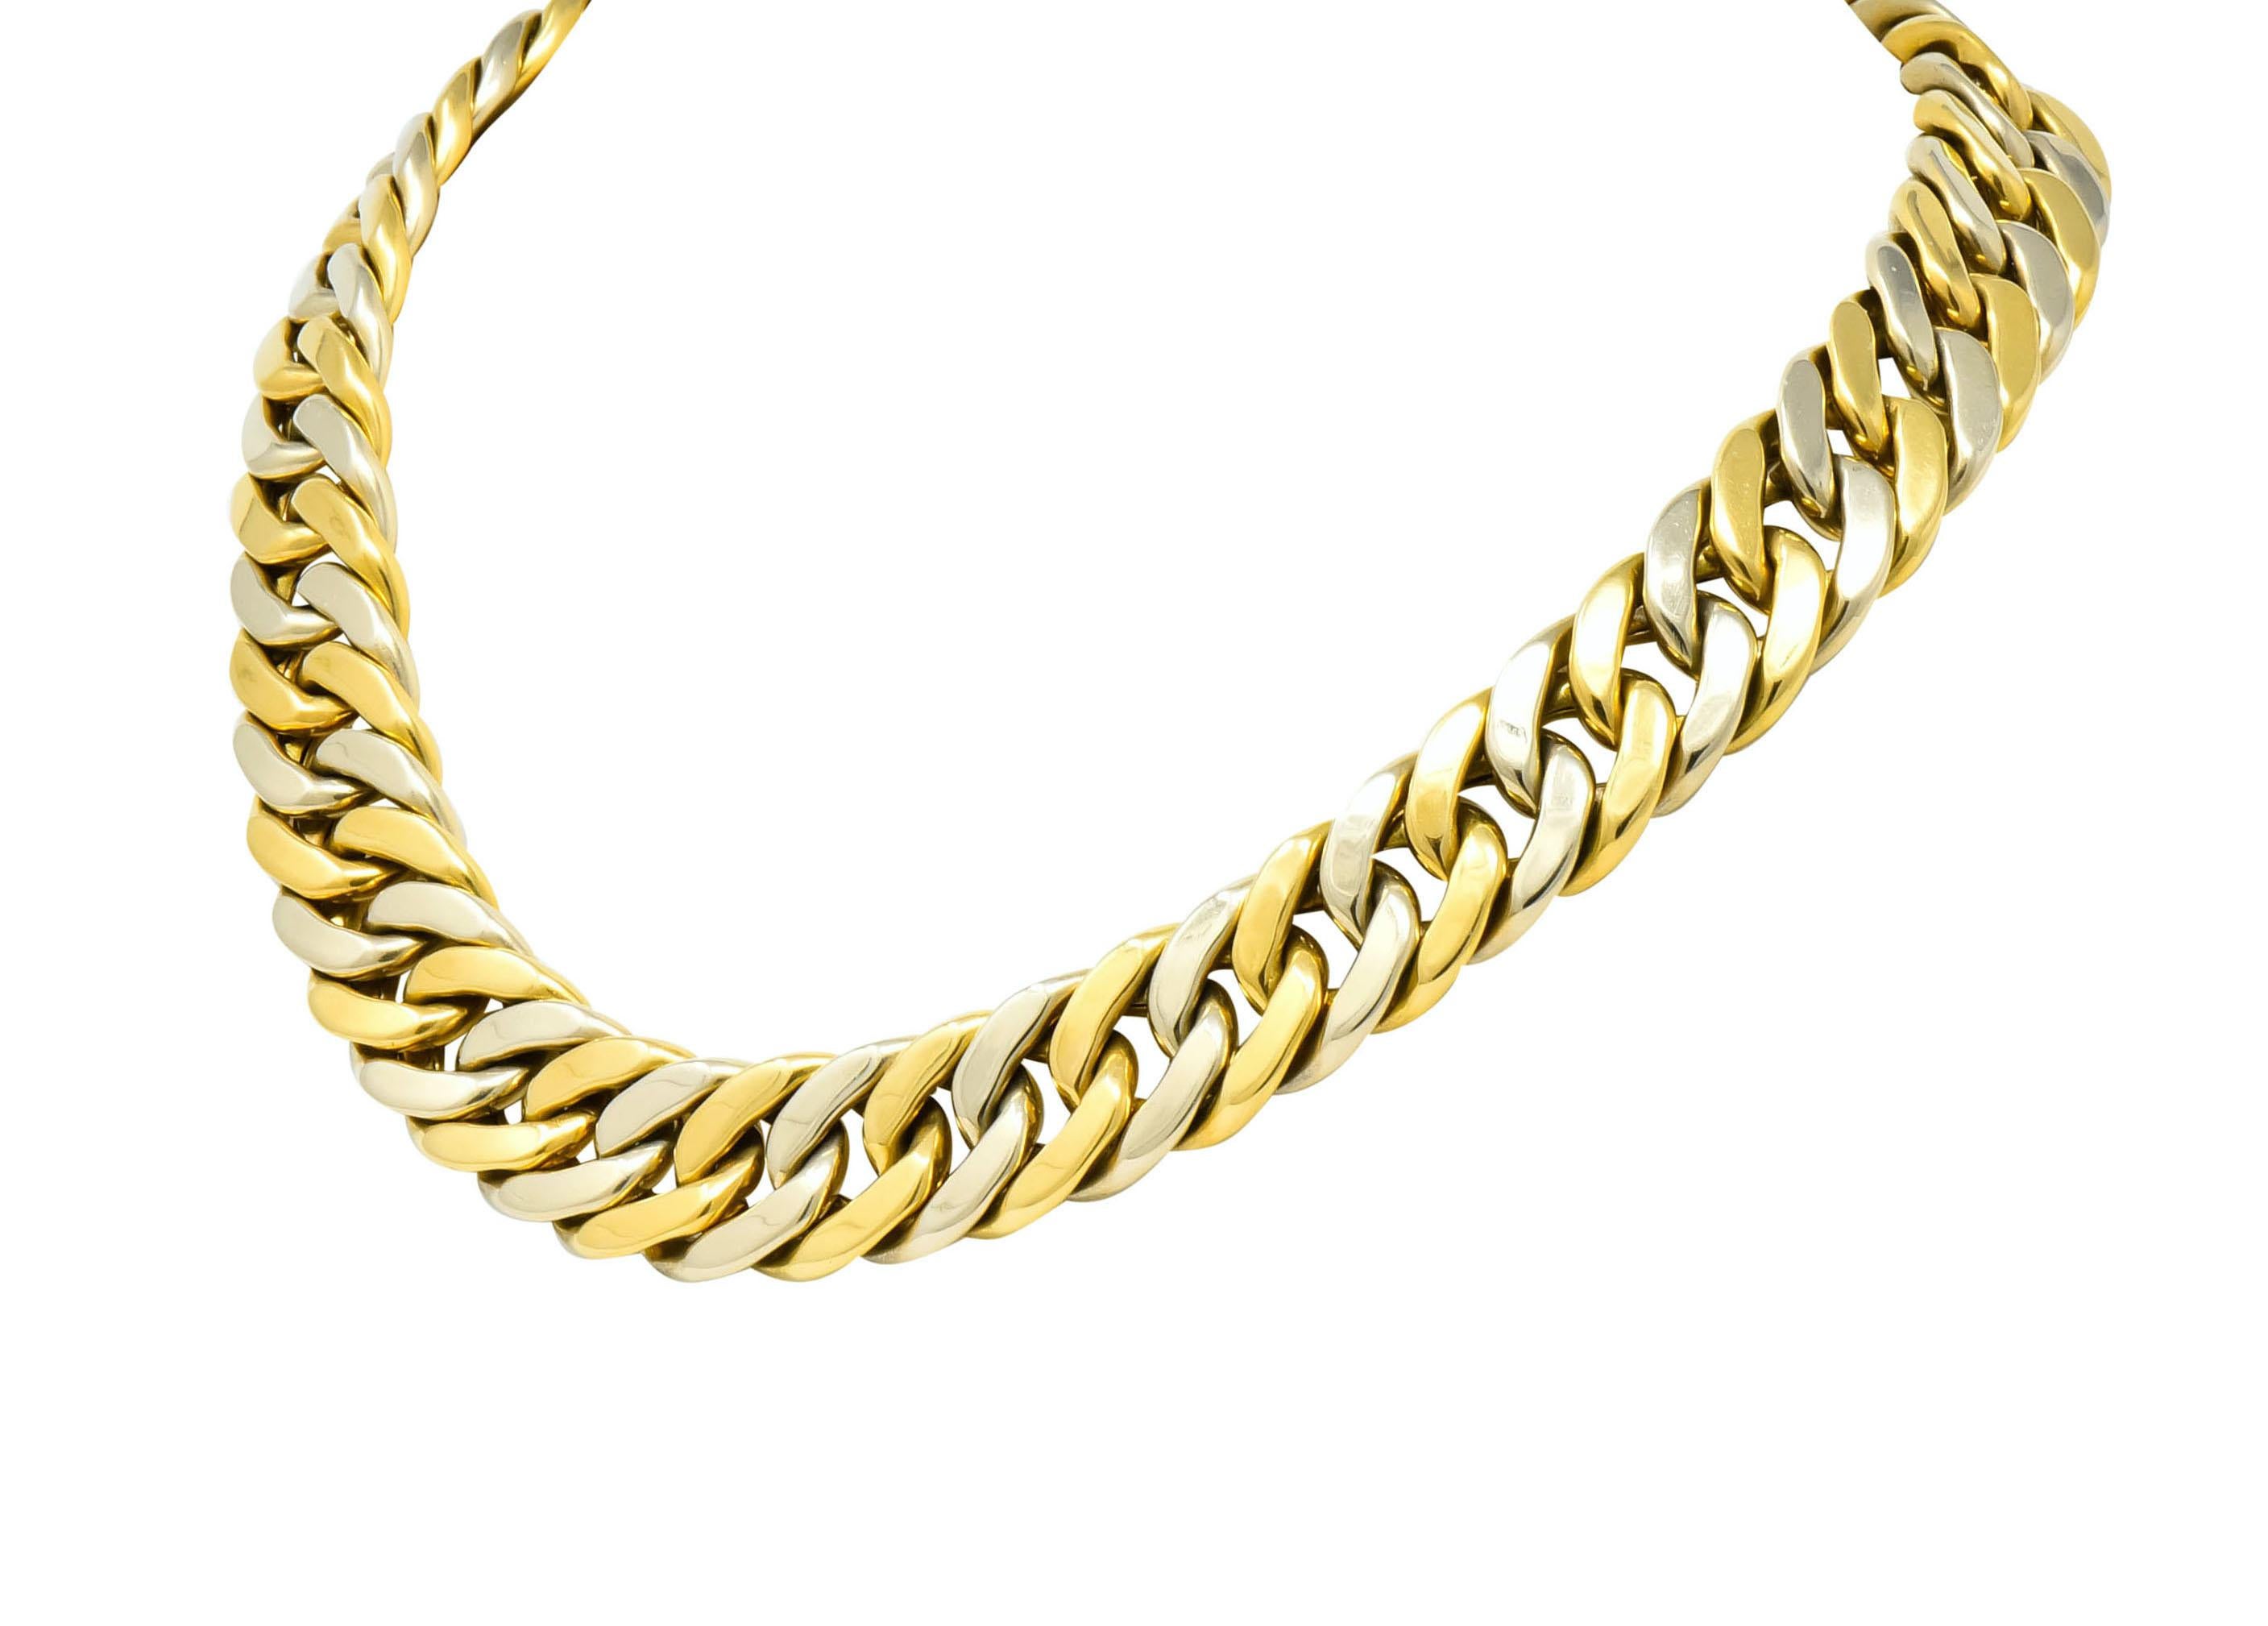 Necklace comprised of hollow, curbed links of alternating white and yellow gold

With a high polished finish

Completed by concealed hinged clasp

Signed Weingrill with assay marks for Verona Italy and maker's mark for Carlo Weingrill

Stamped 750